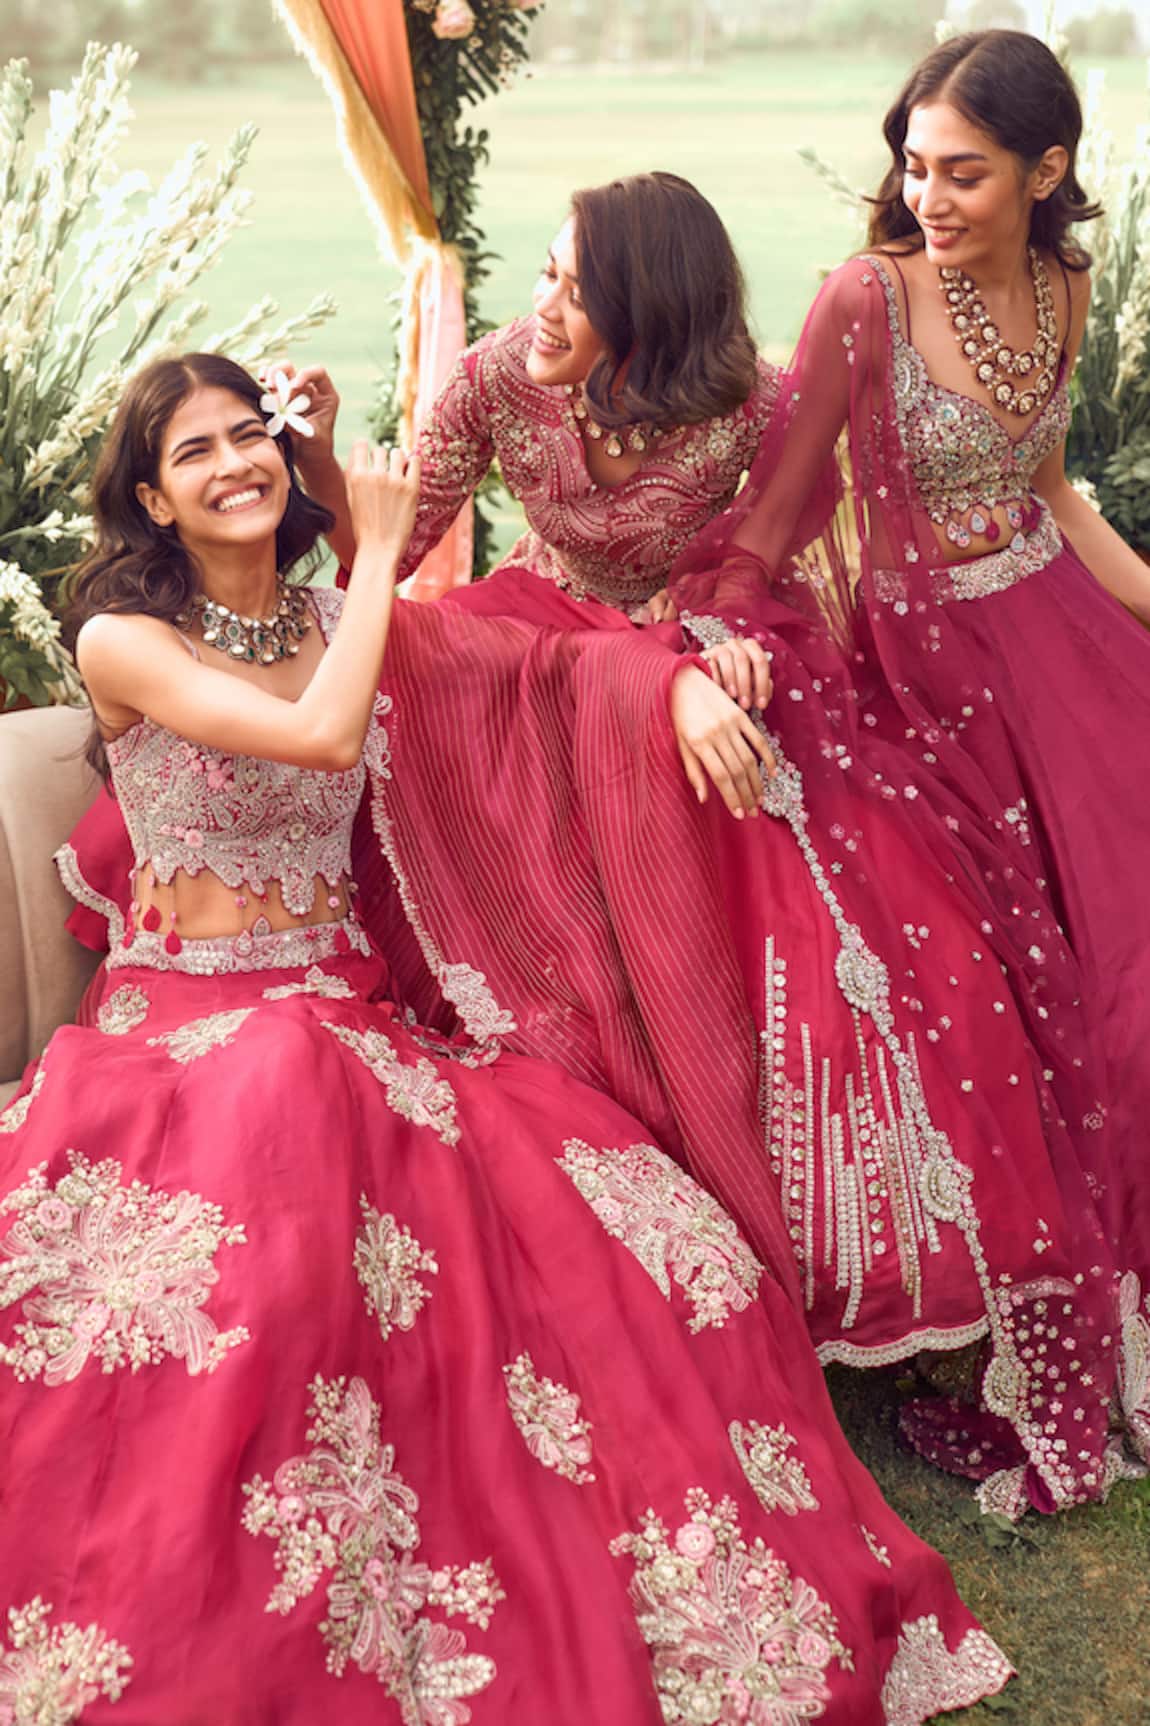 Top 10 Multi-designer stores in India to shop for the trendiest bridal wear  | Bridal and Groom's Wear | Wedding Blog